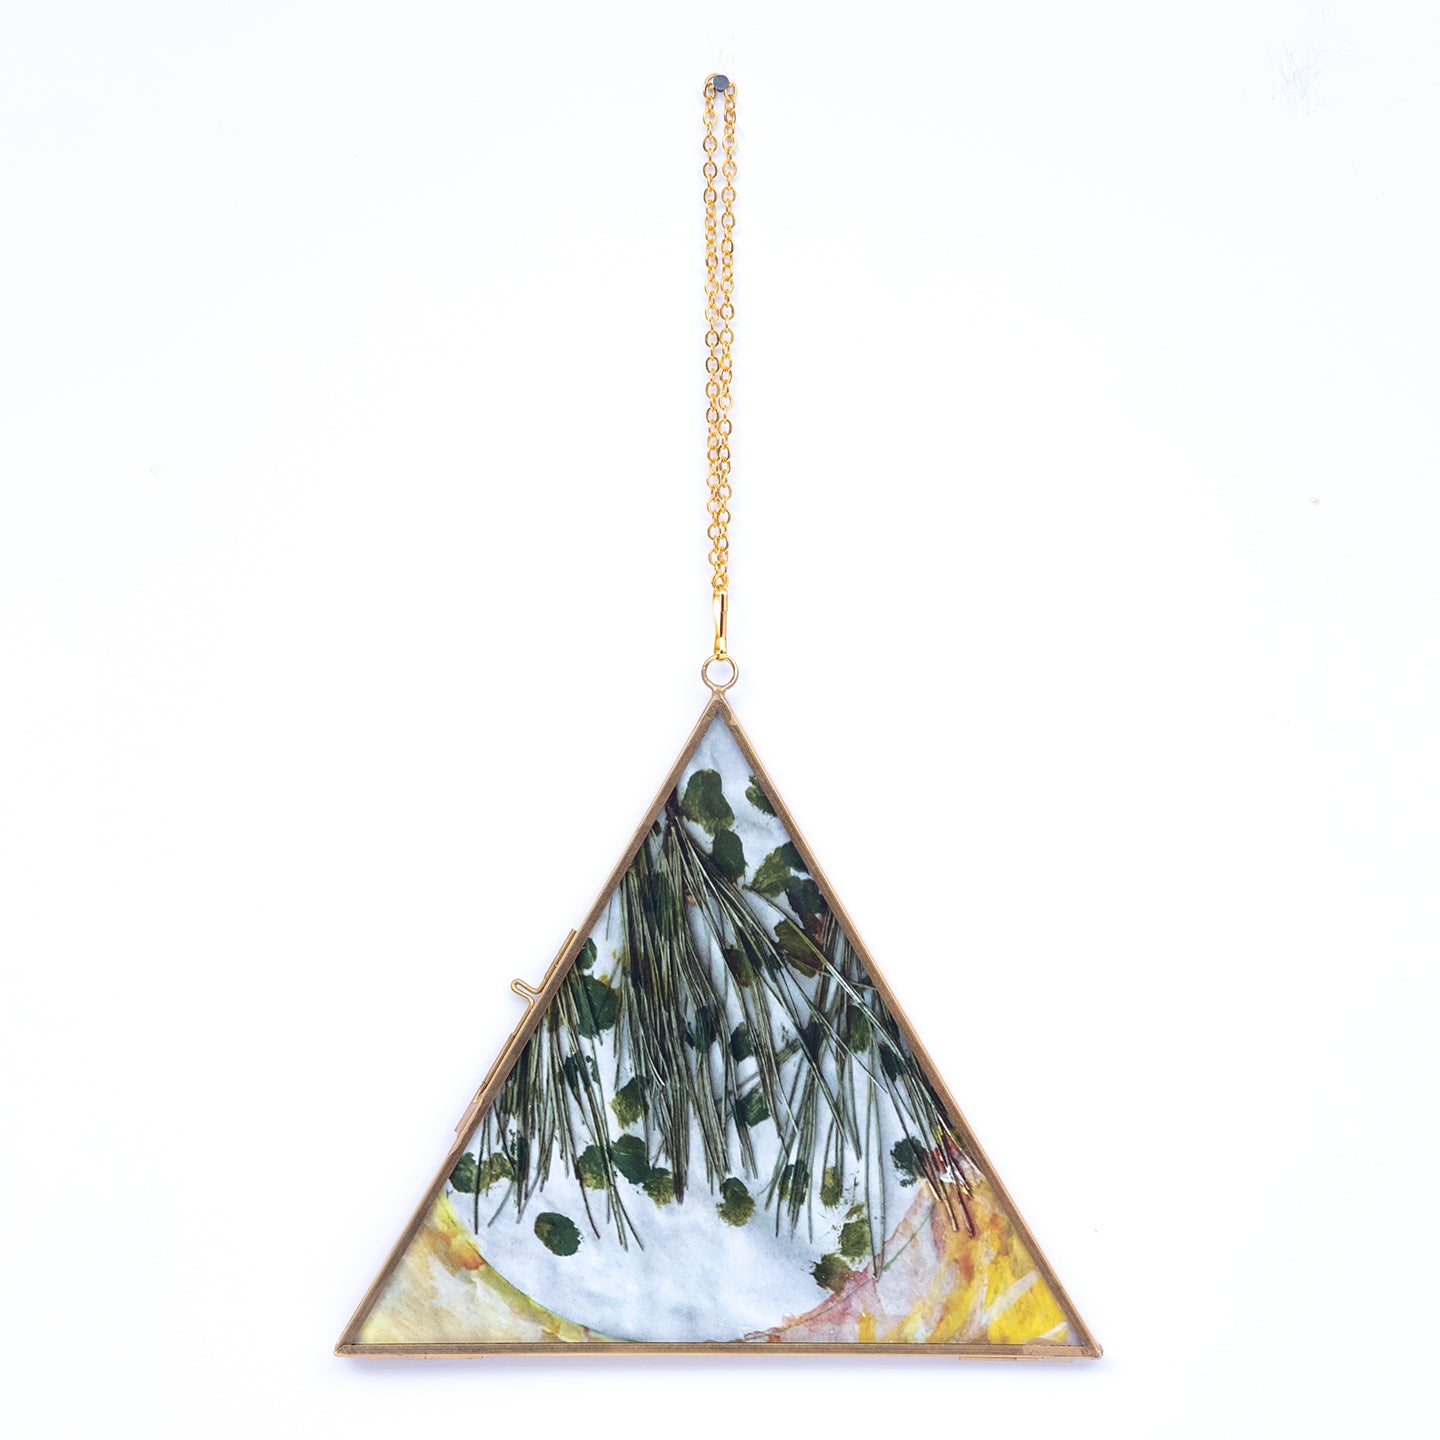 Triangle shaped frames with artistic images of nature title Wood U from Everyday Art Editions